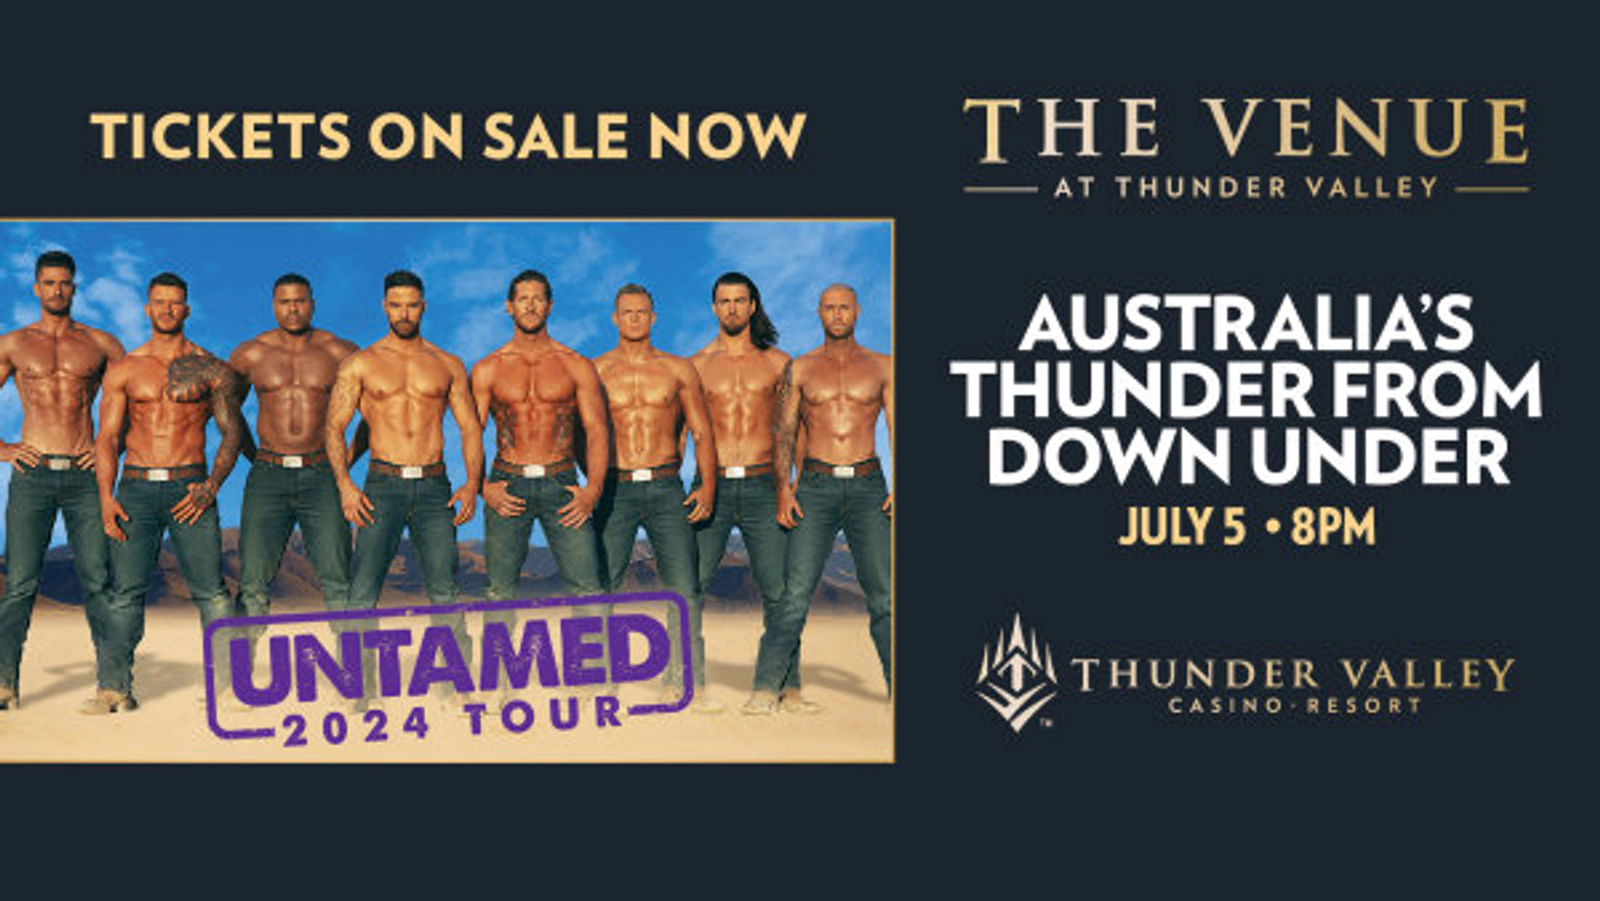 Win Tickets To See Thunder From Down Under July 5th At Thunder Valley!